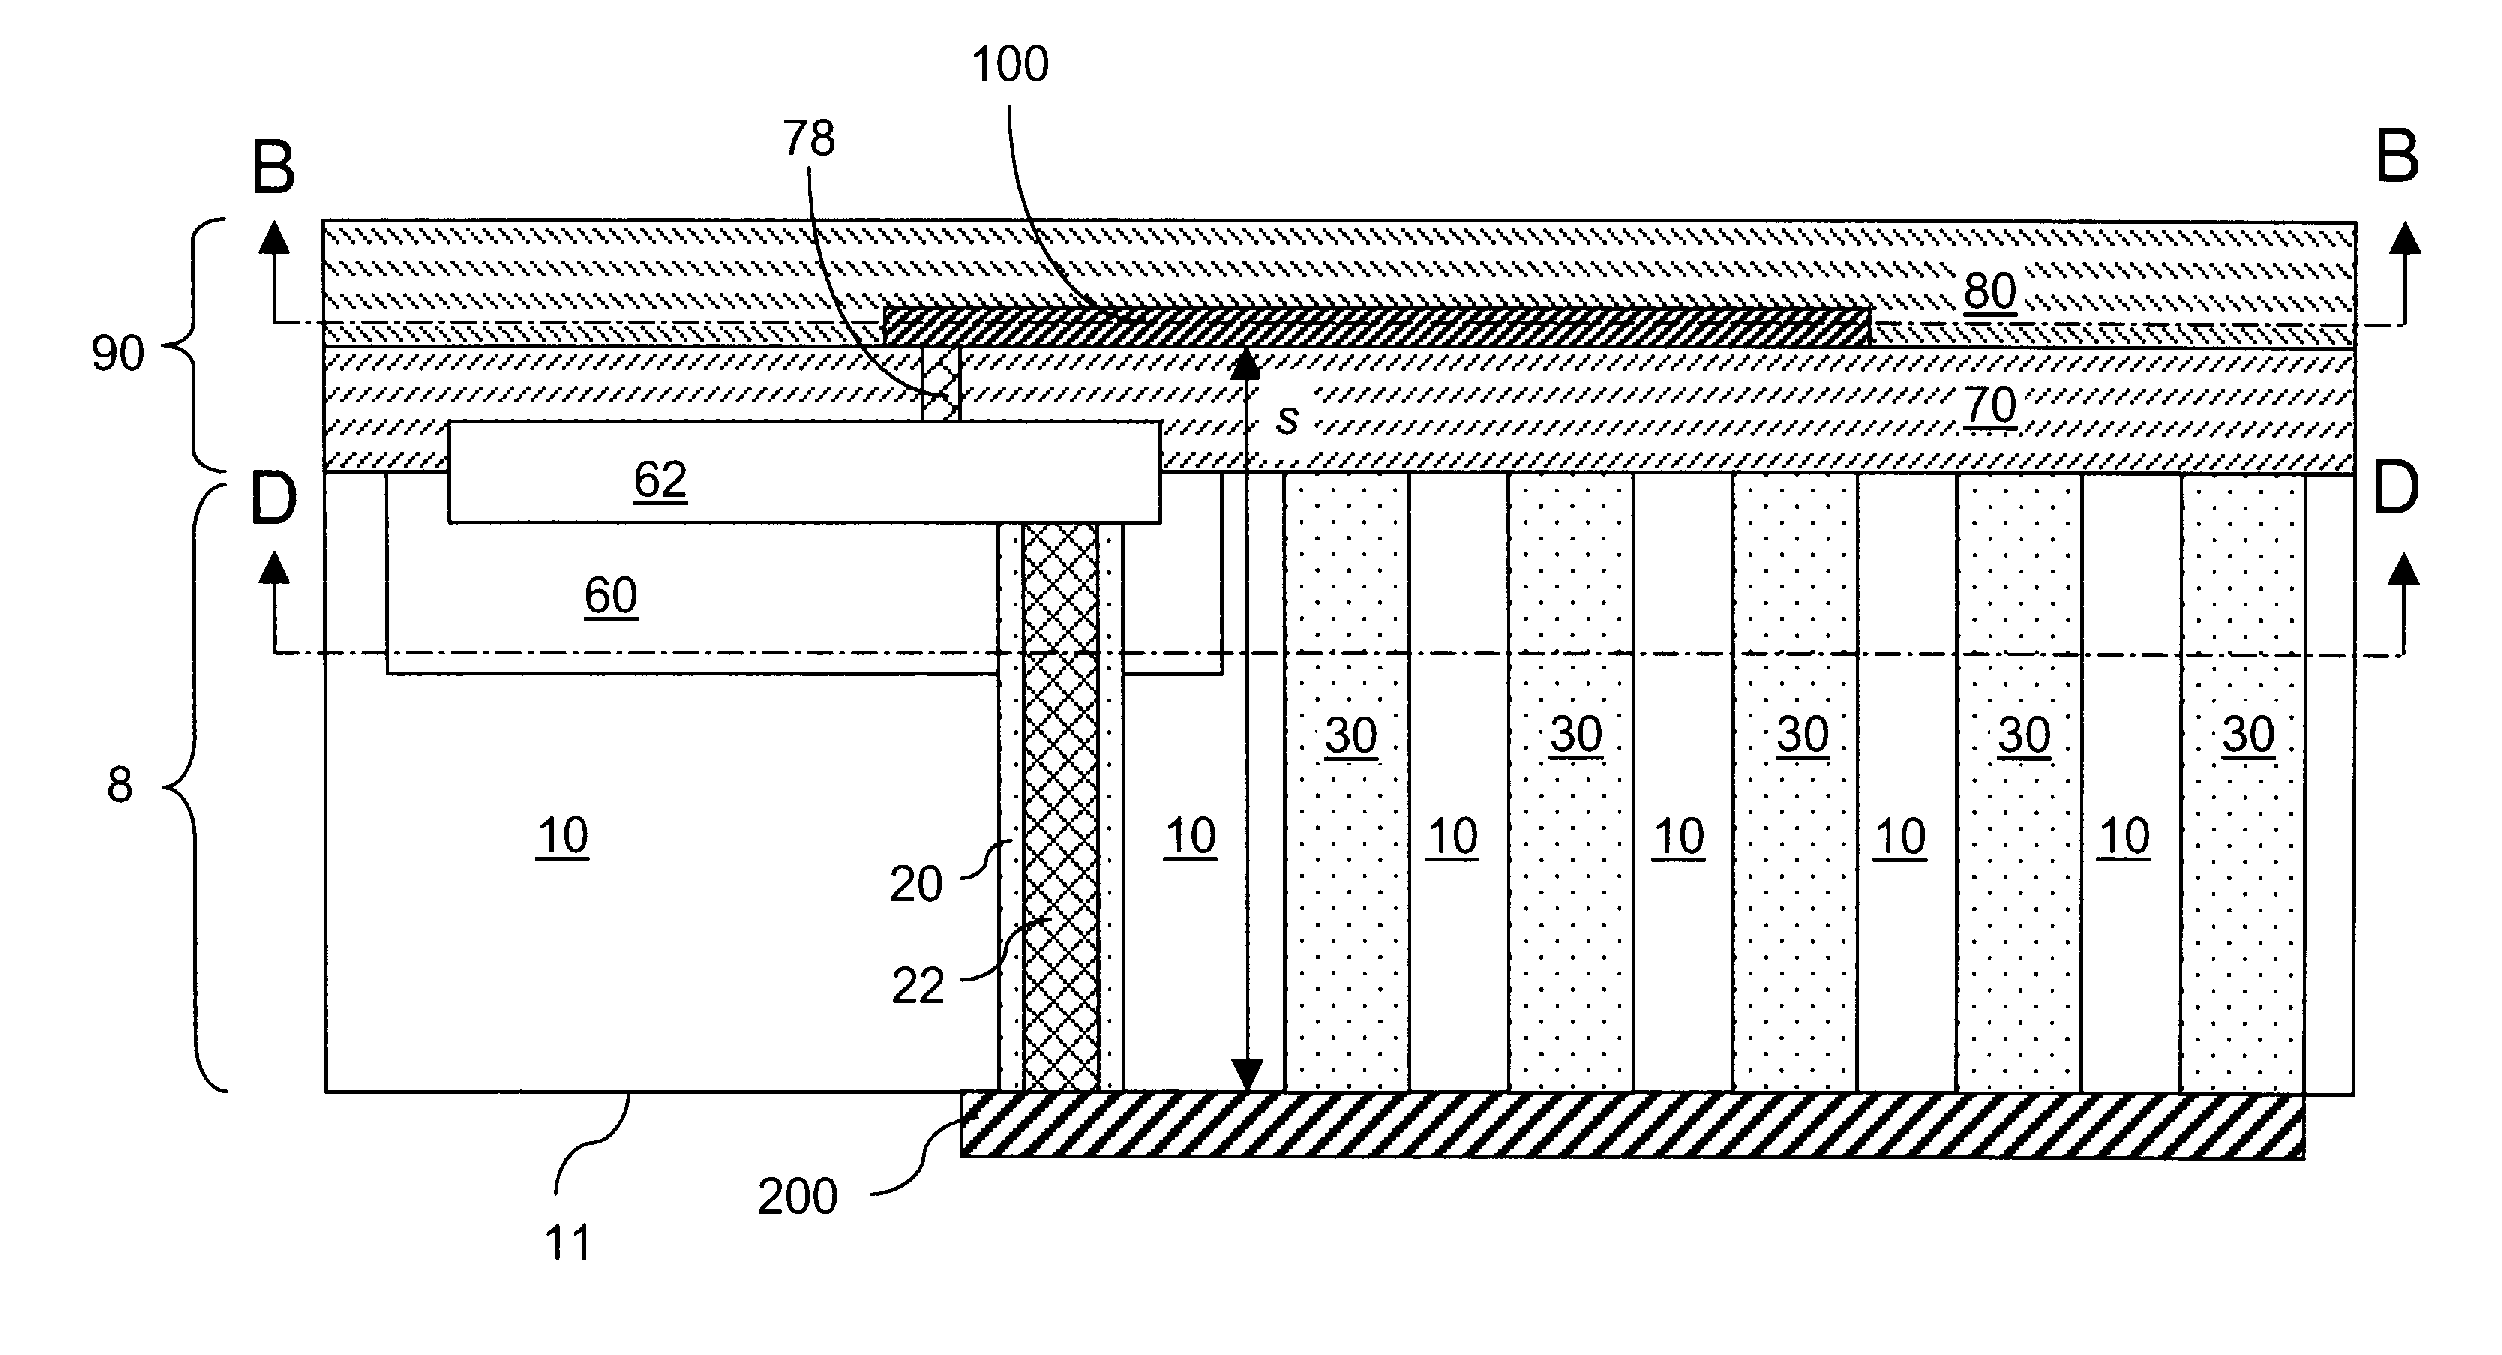 Integrated millimeter wave antenna and transceiver on a substrate